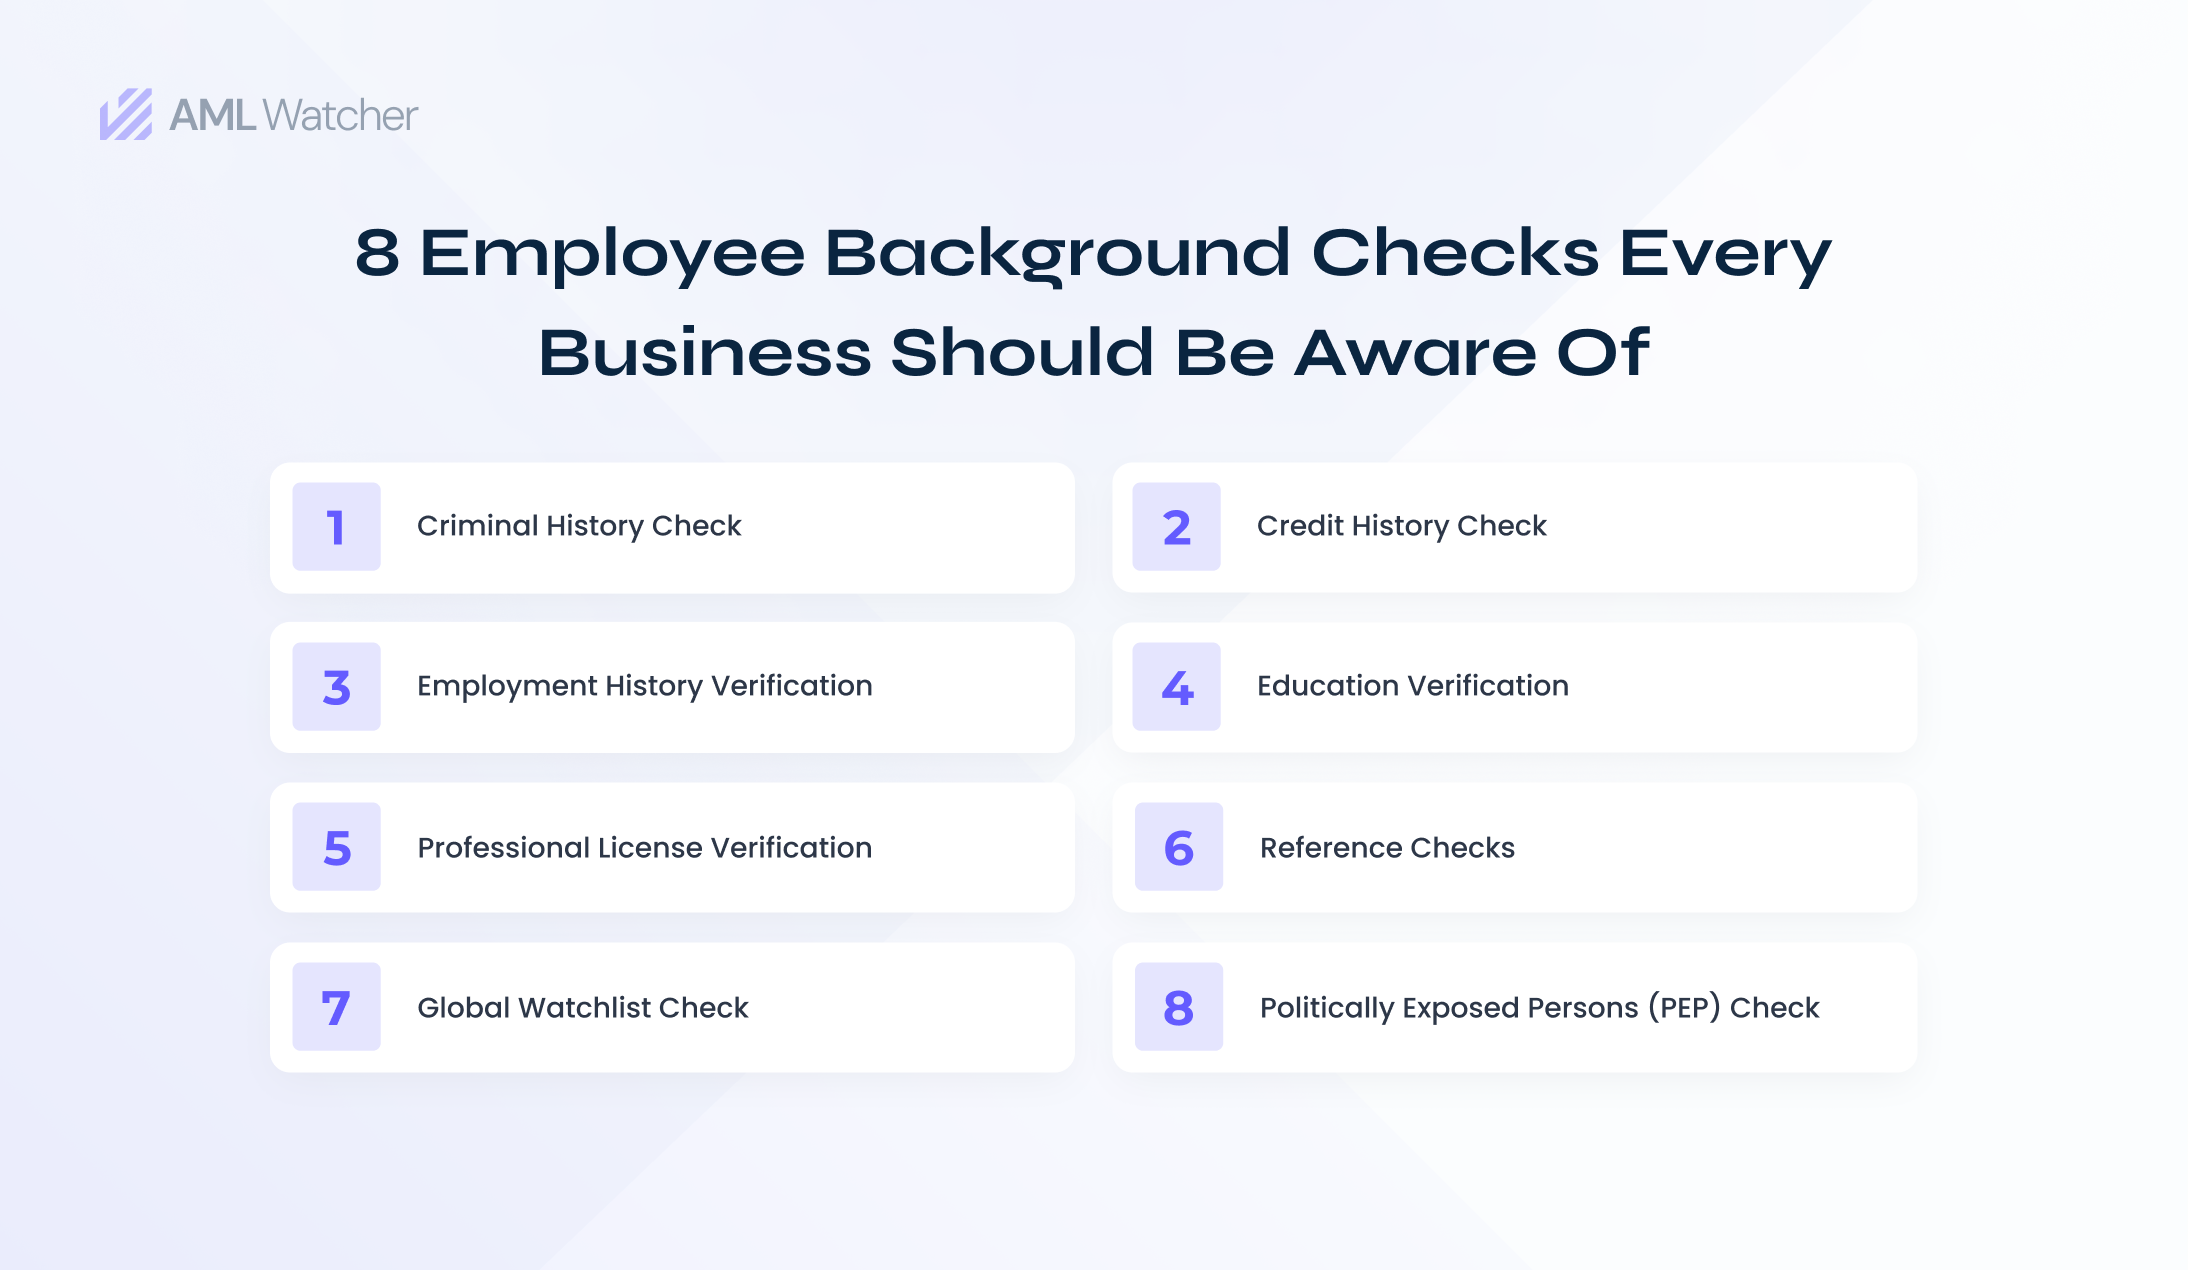 The featured image shows types of employee background checks that should be adopted according to a business need.